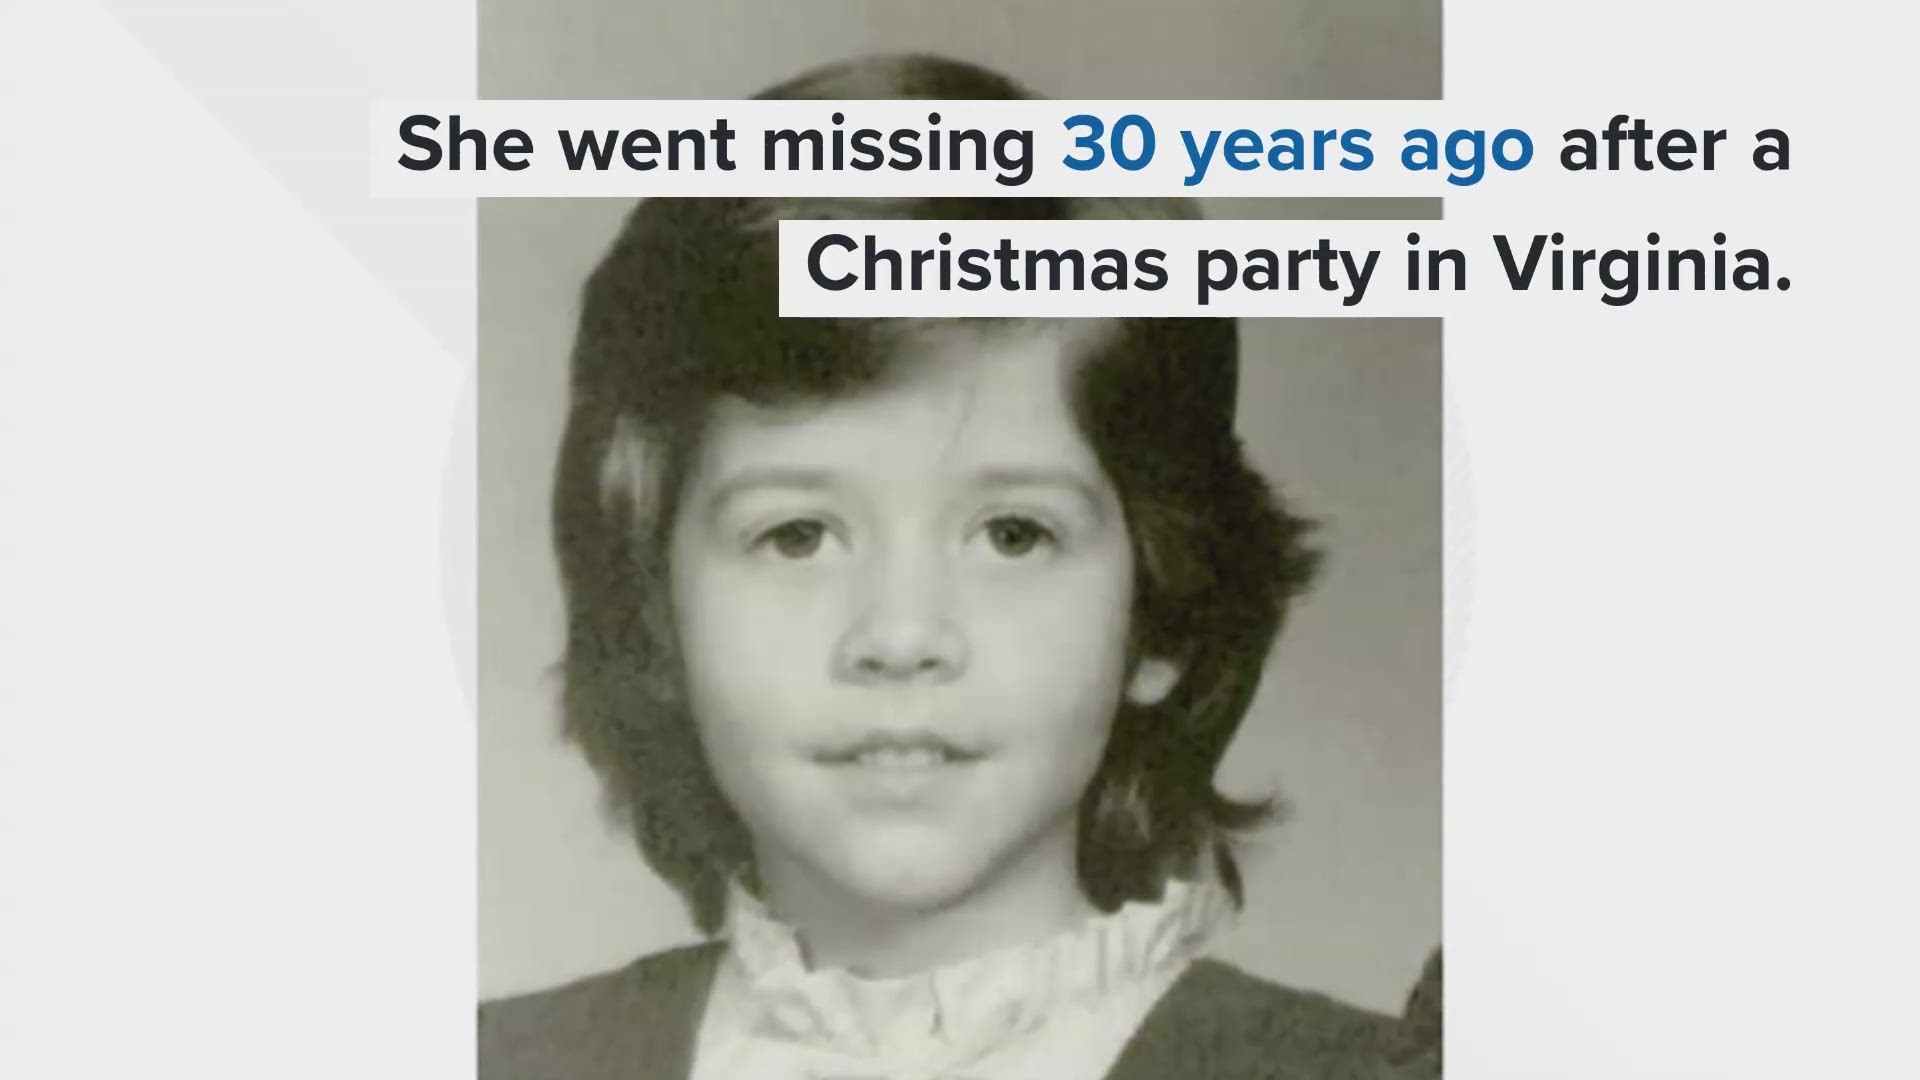 5-year-old Melissa Brannen vanished from a Christmas party at her apartment complex Dec. 3, 1989. She has never been found.